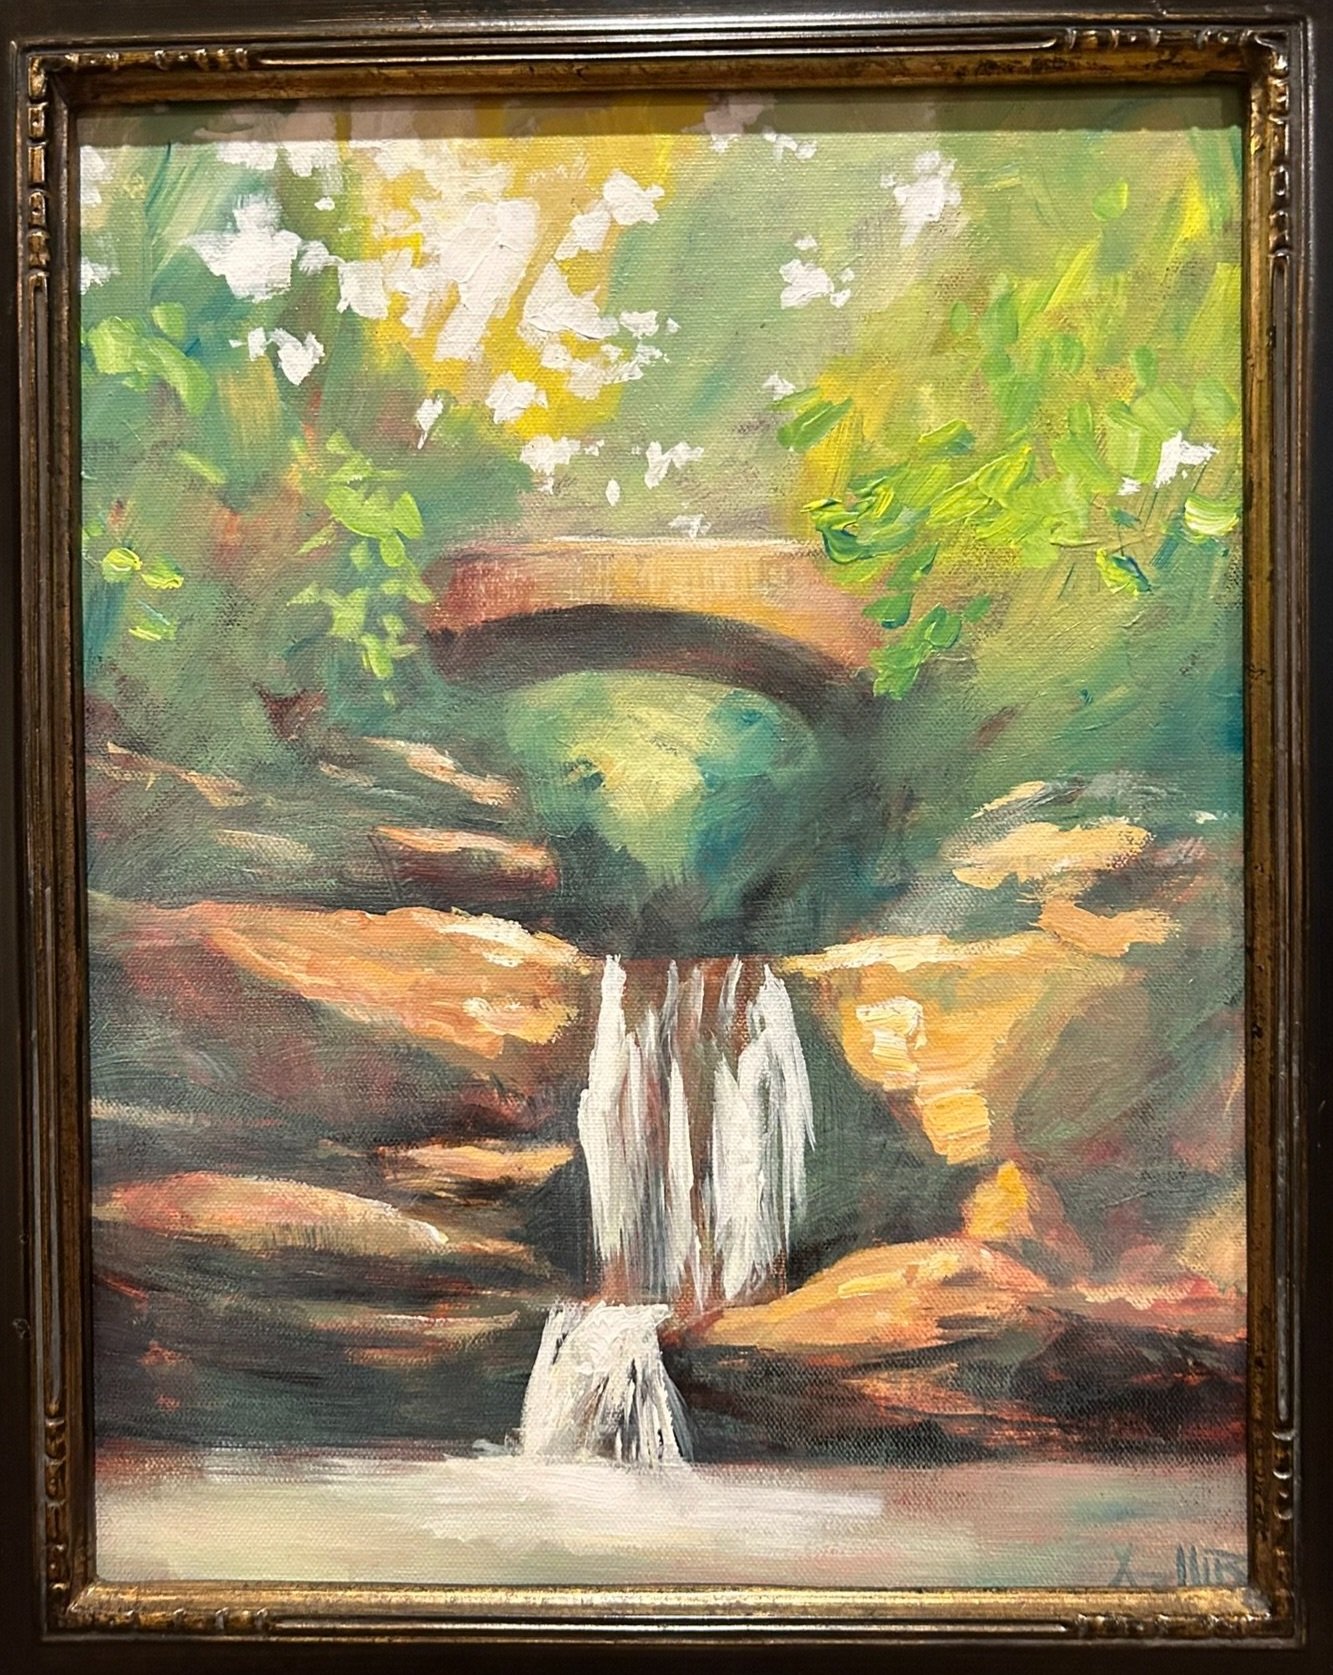 SOLD, Waterfall at Hocking Hills, Acrylic on Canvas, Copyright 2017 Hirschten